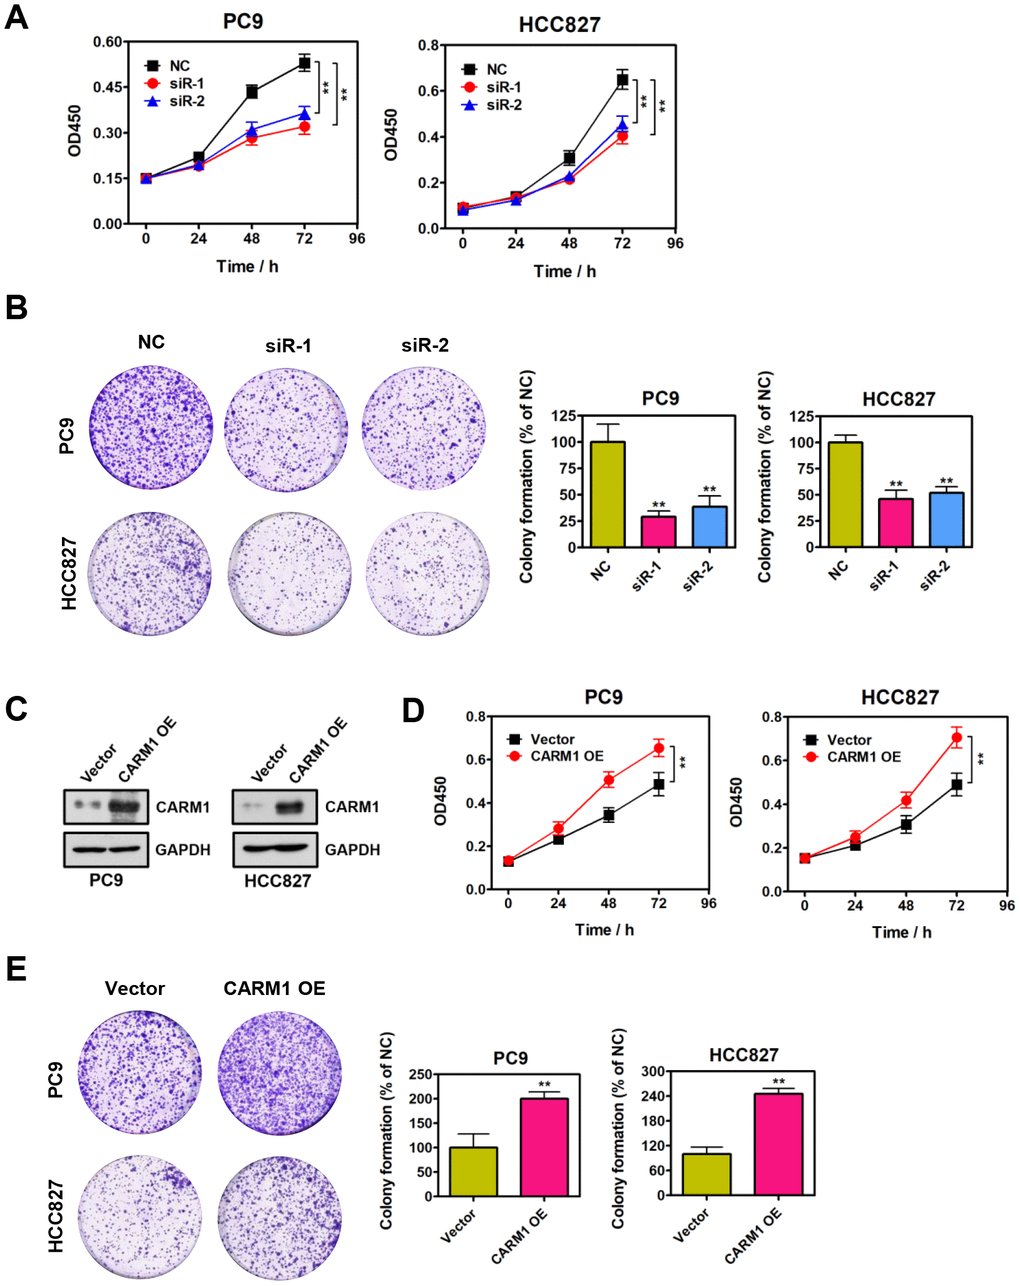 CARM1 promotes NSCLC cell proliferation in vitro. (A) Cell proliferation abilities of CARM1-depleted PC9 and HCC827 cells were assessed by CCK-8 assays. The data were presented as means ± SDs of three independent experiments; **P B) Colony-formative abilities of CARM1-depleted PC9 and HCC827 cells were determined by colony-formation assays. Right panel, the relative colony-formative abilities (% of NC) were quantified. The data were shown as means ± SDs of three independent experiments; **P C) Overexpression of CARM1 in PC9 and HCC827 cells was examined by Western blot. GAPDH was used as loading control. (D) Cell proliferative abilities of CARM1-overexpressed PC9 and HCC827 cells were assessed by CCK-8 assays. The data were presented as means ± SDs of three independent experiments; **P E) Colony-formative abilities of CARM1-overexpressed PC9 and HCC827 cells were determined by colony-formation assays. Right panel, the relative colony-formative abilities (% of NC) were quantified. The data were shown as means ± SDs of three independent experiments; **P 